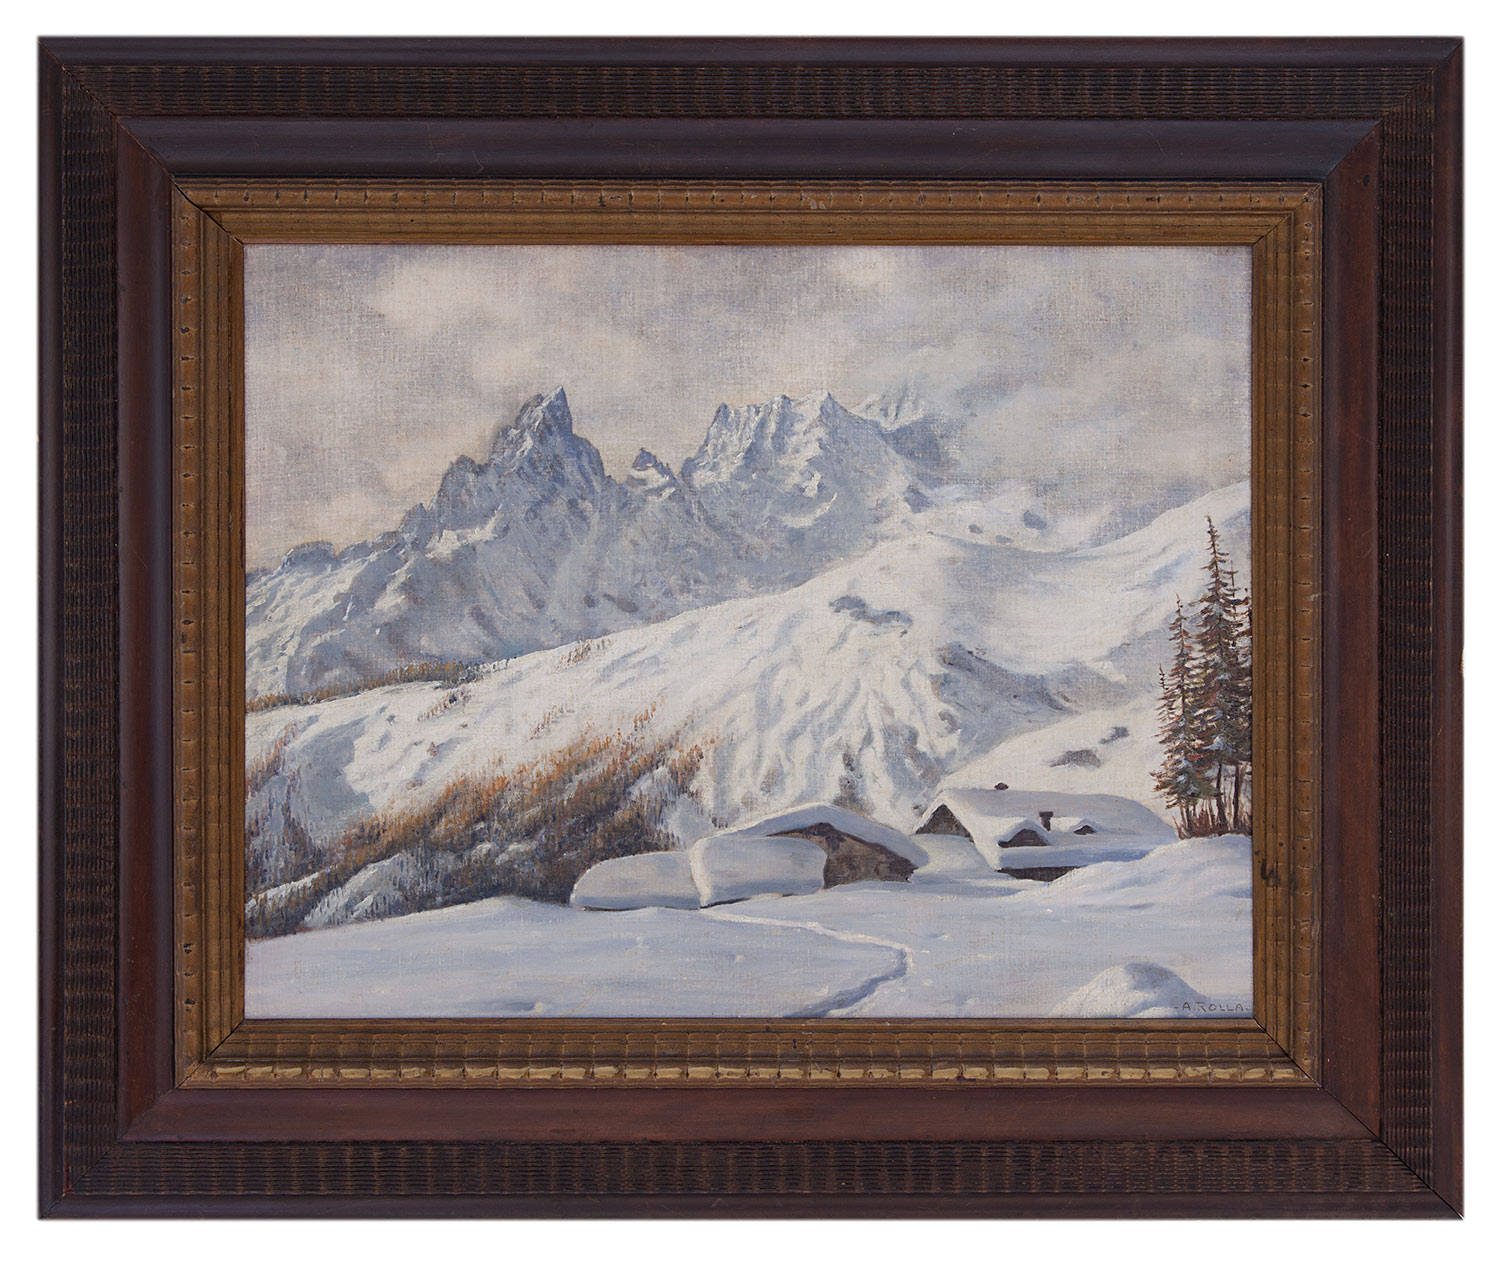 adolfo rolla: Neve in val Ferret